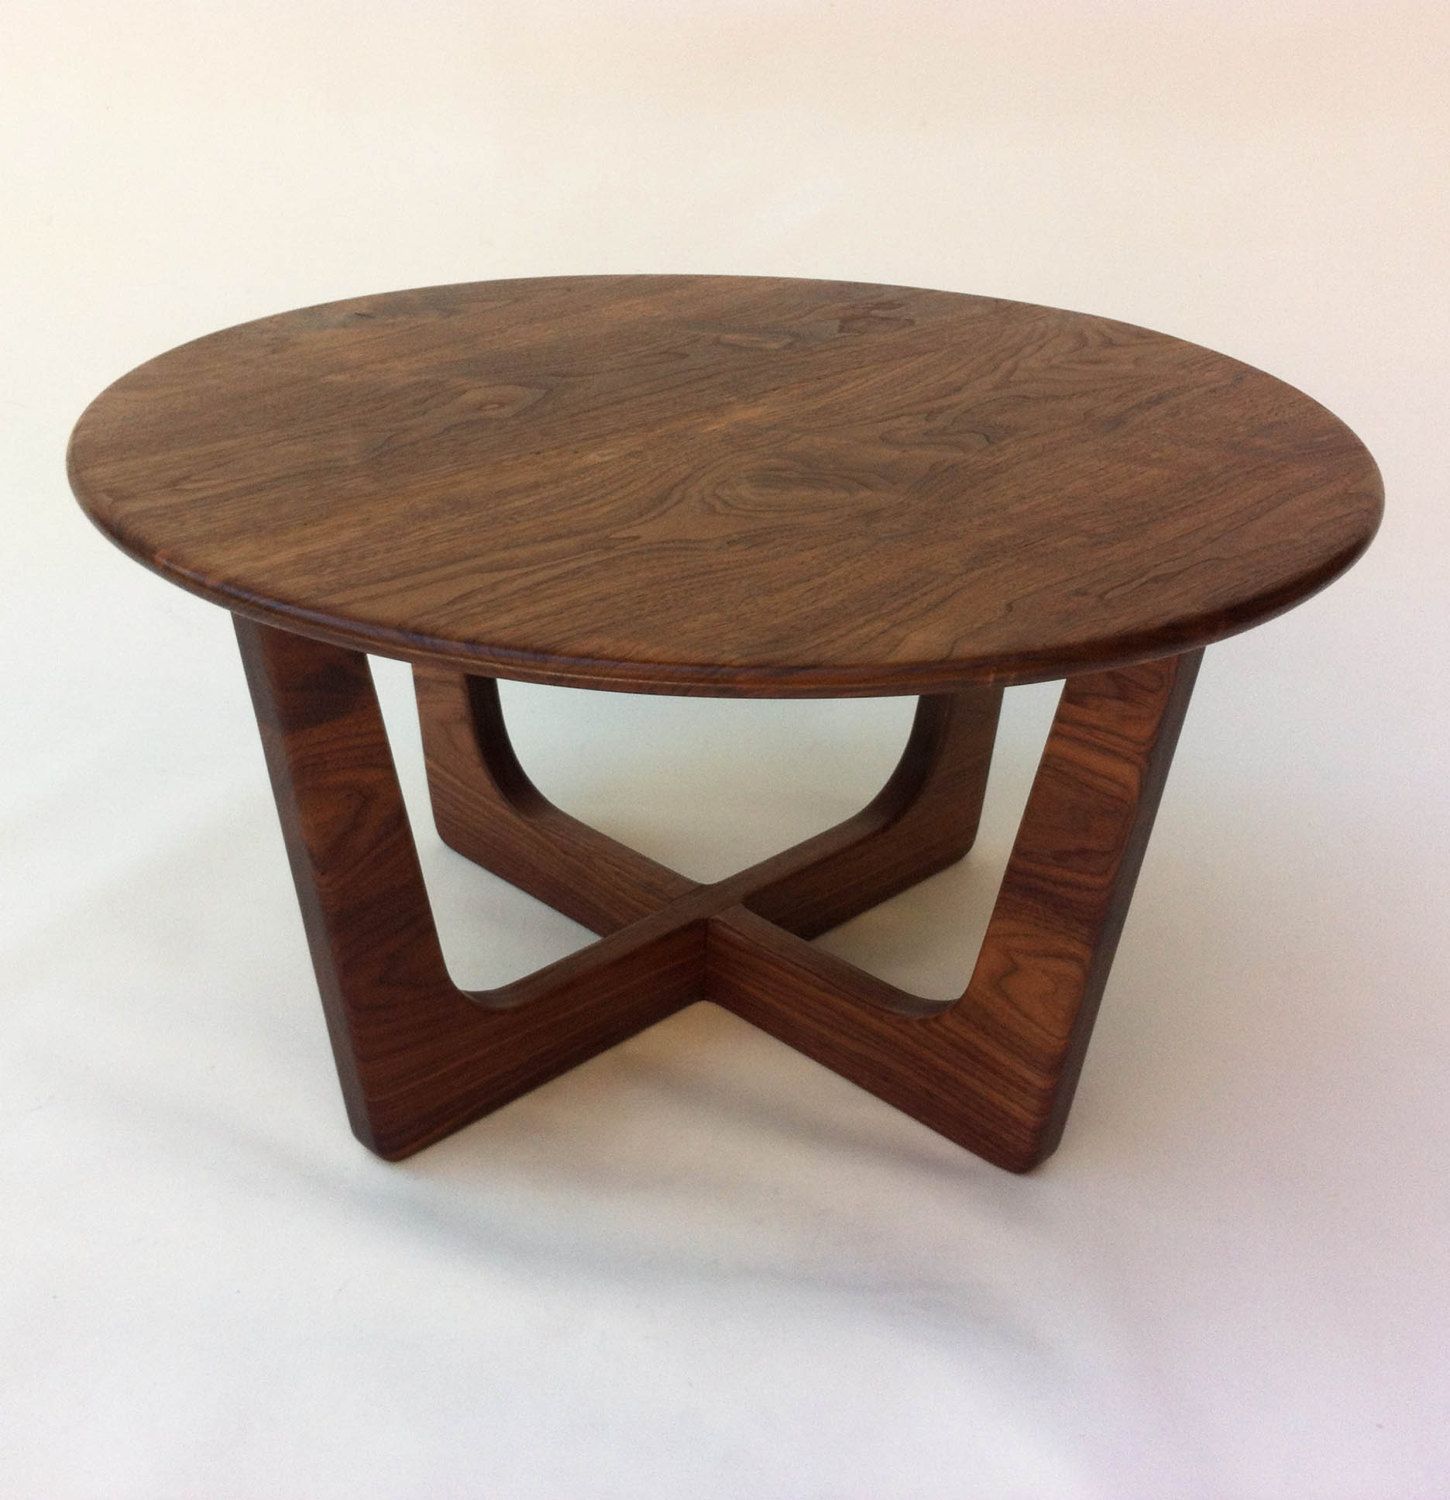 Solid Walnut Round Mid Century Modern Coffee Table With Regard To Wooden Mid Century Coffee Tables (Gallery 3 of 20)